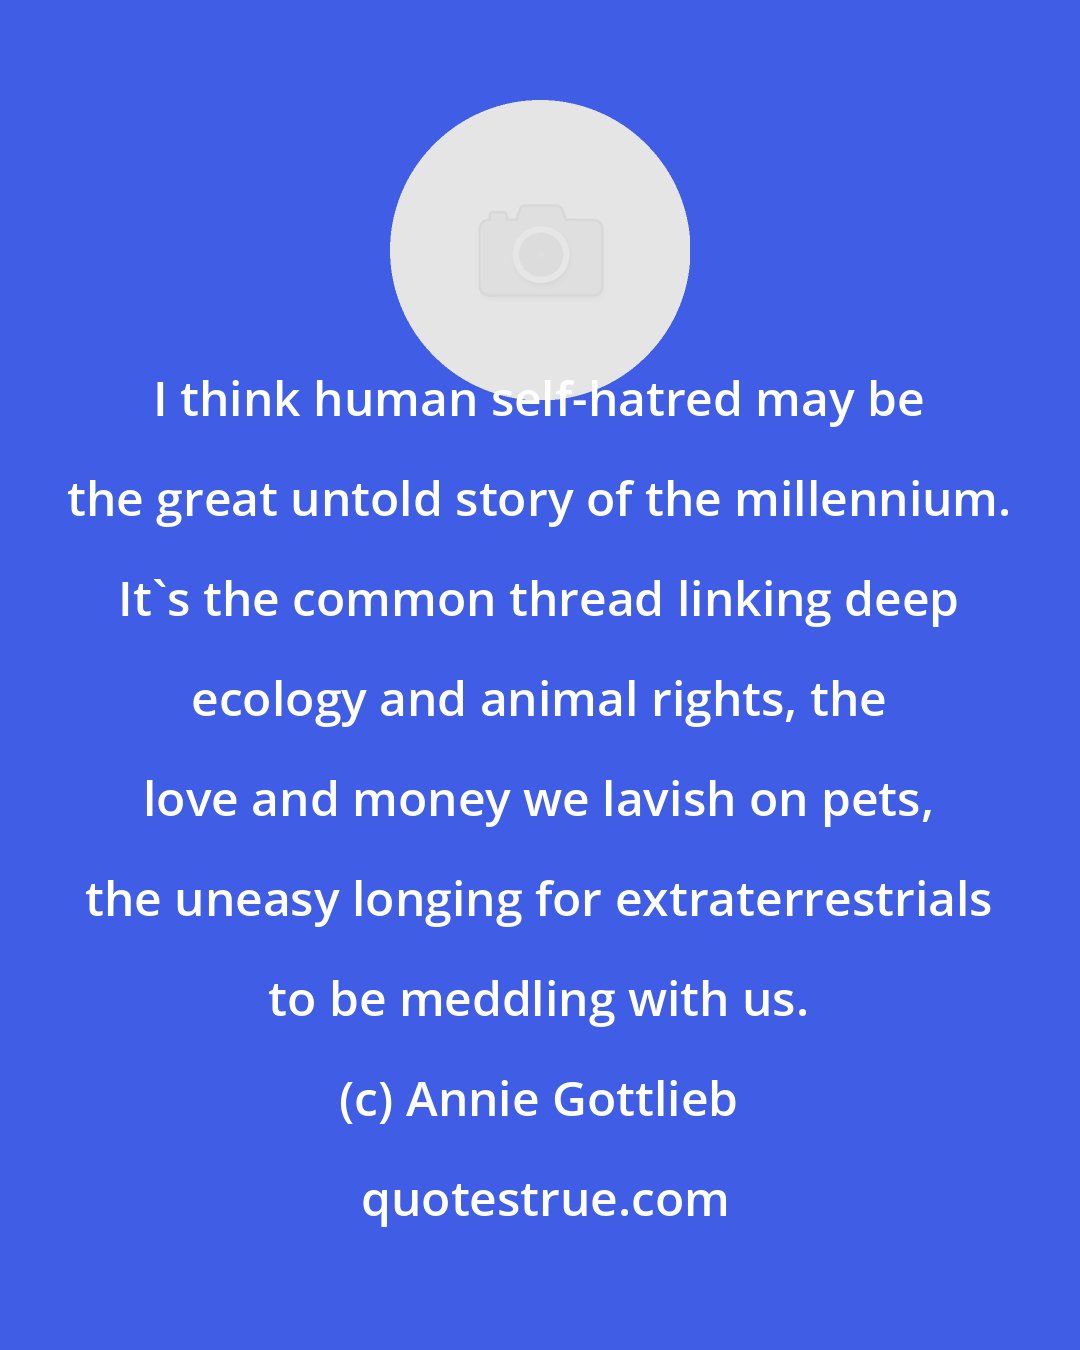 Annie Gottlieb: I think human self-hatred may be the great untold story of the millennium. It's the common thread linking deep ecology and animal rights, the love and money we lavish on pets, the uneasy longing for extraterrestrials to be meddling with us.